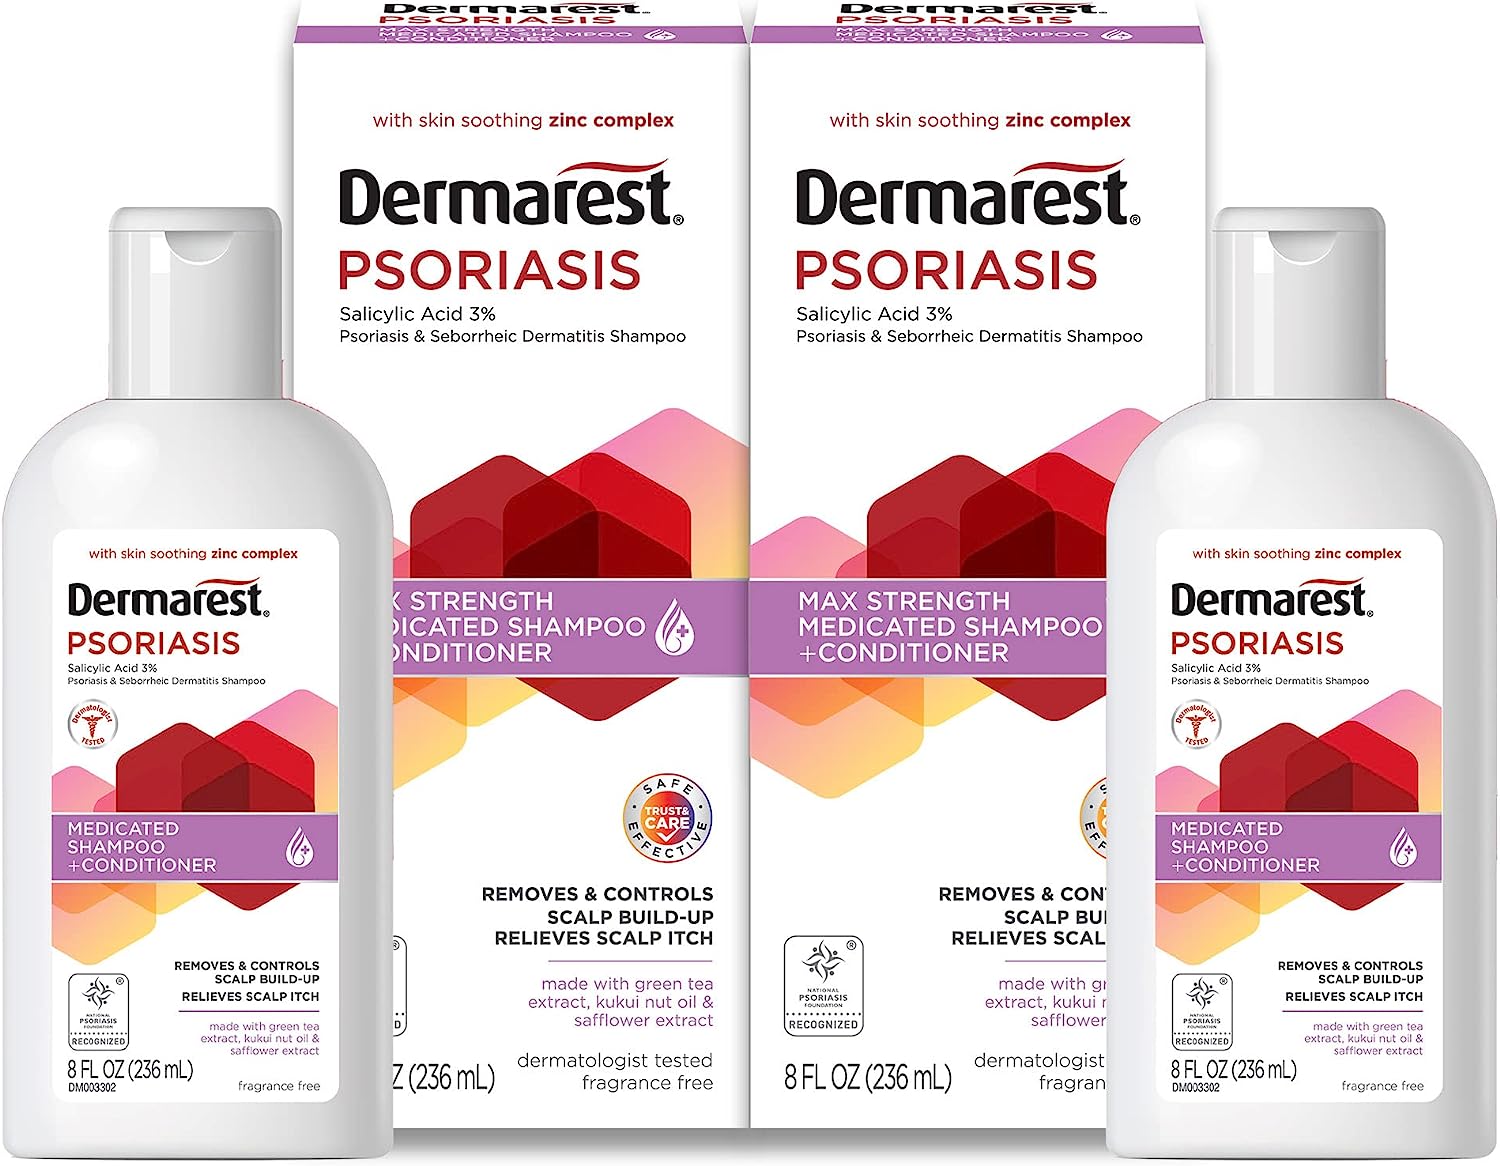 Dermarest Psoriasis Medicated Shampoo and Conditioner, [...]